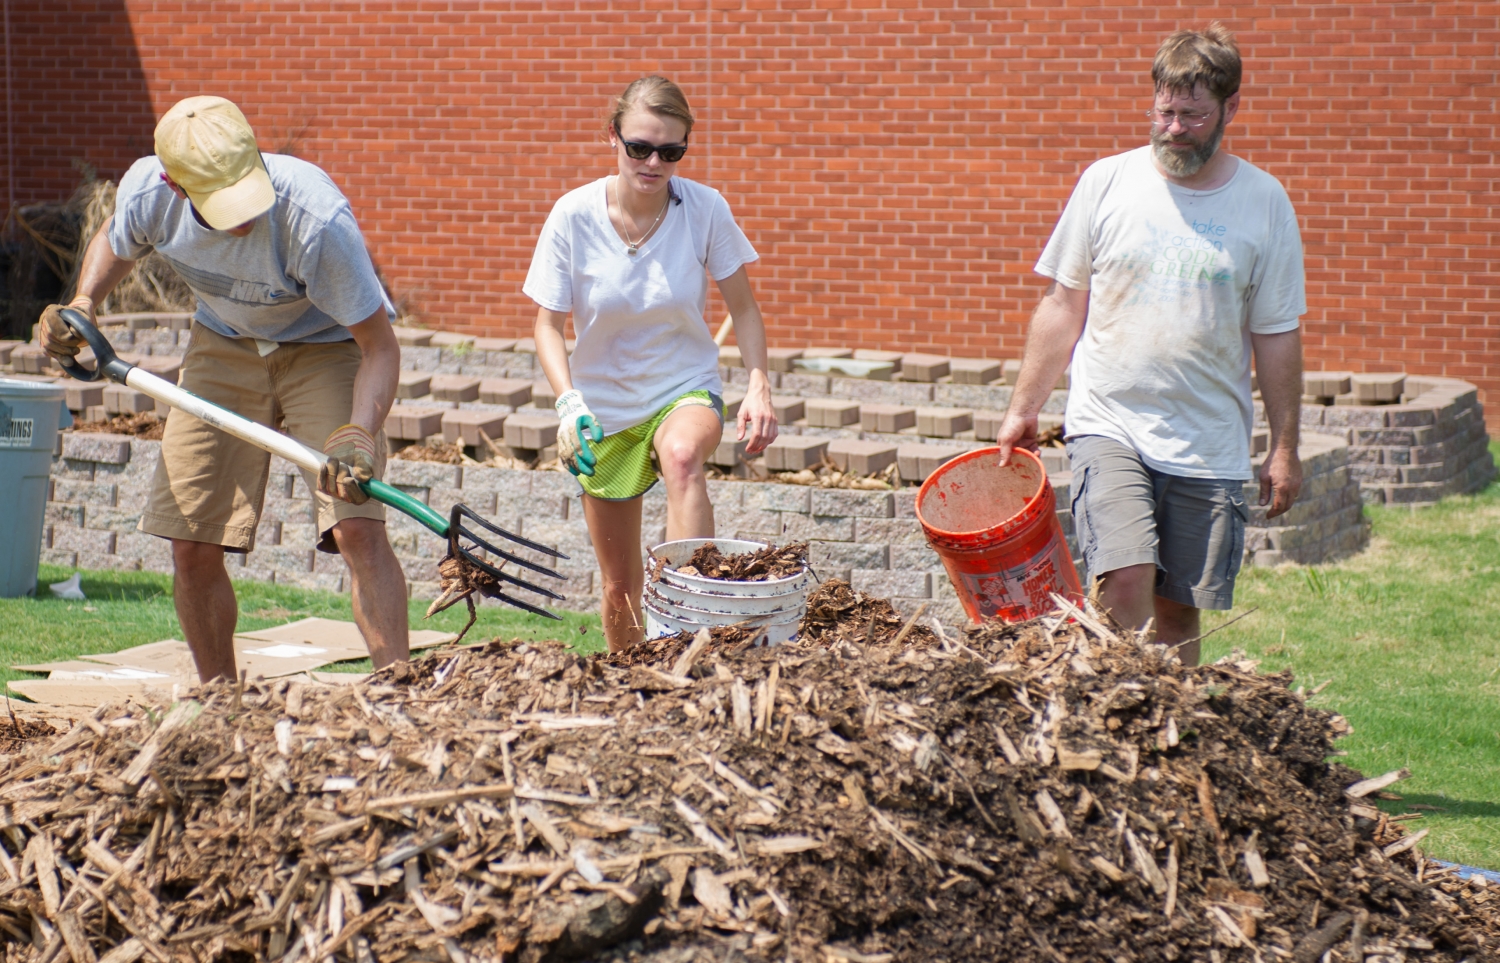 Students and staff spread mulch at the campus community garden in August 2013